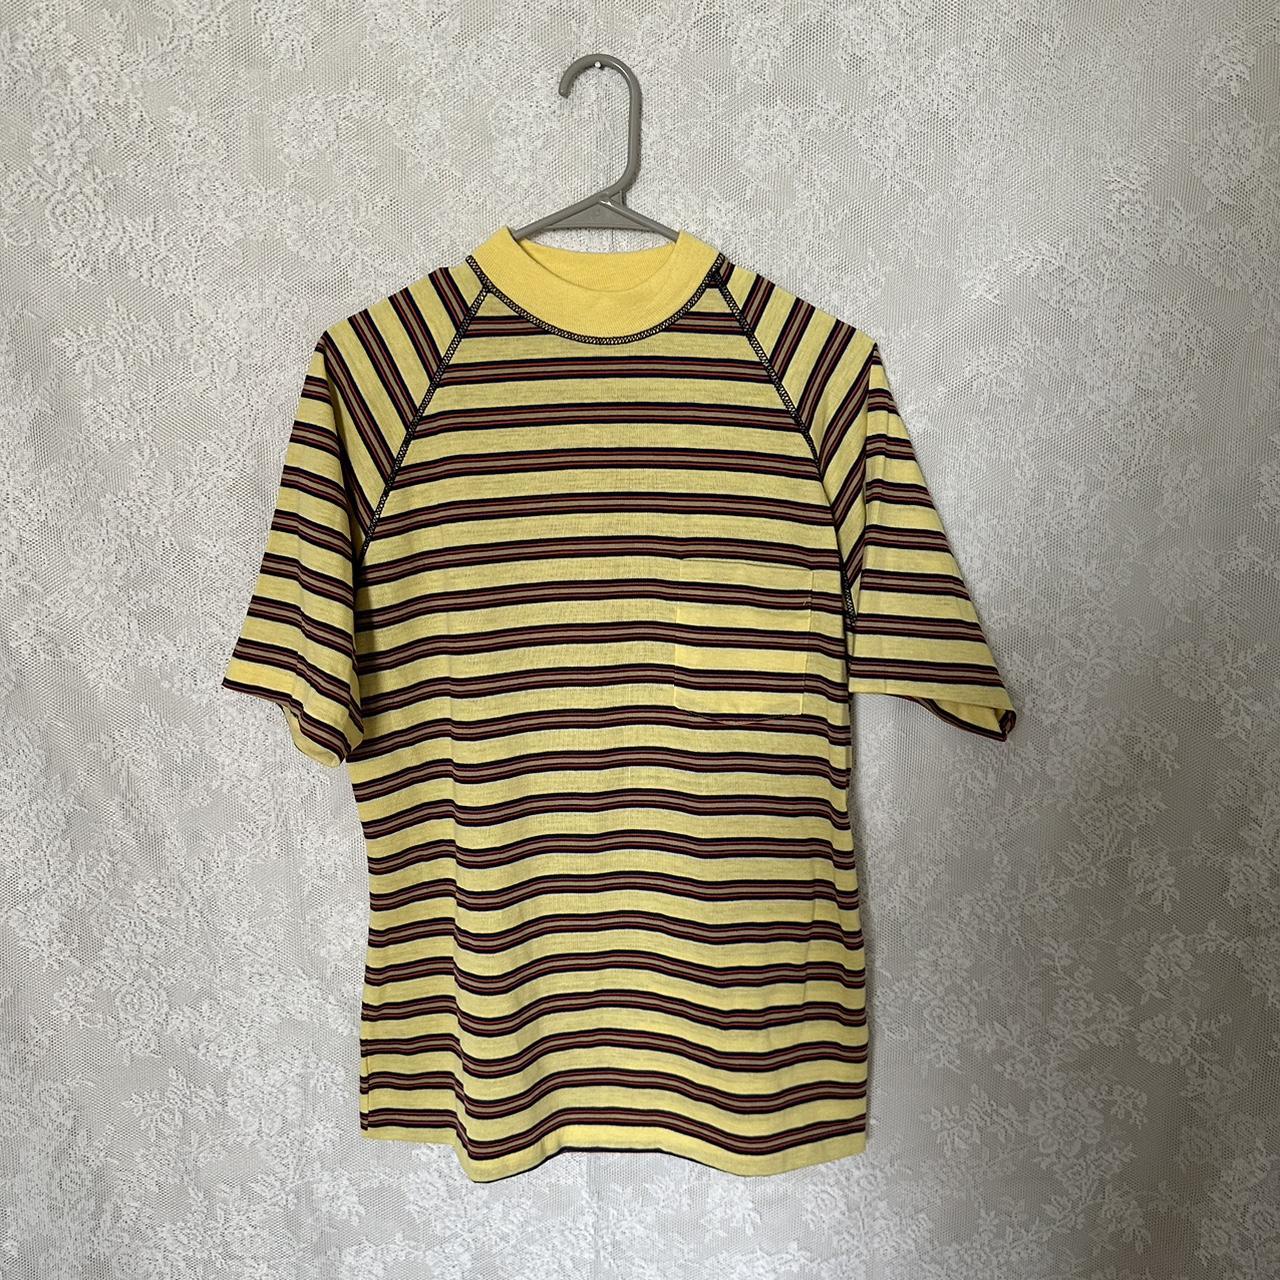 JCPenney Men's Yellow and Black T-shirt | Depop